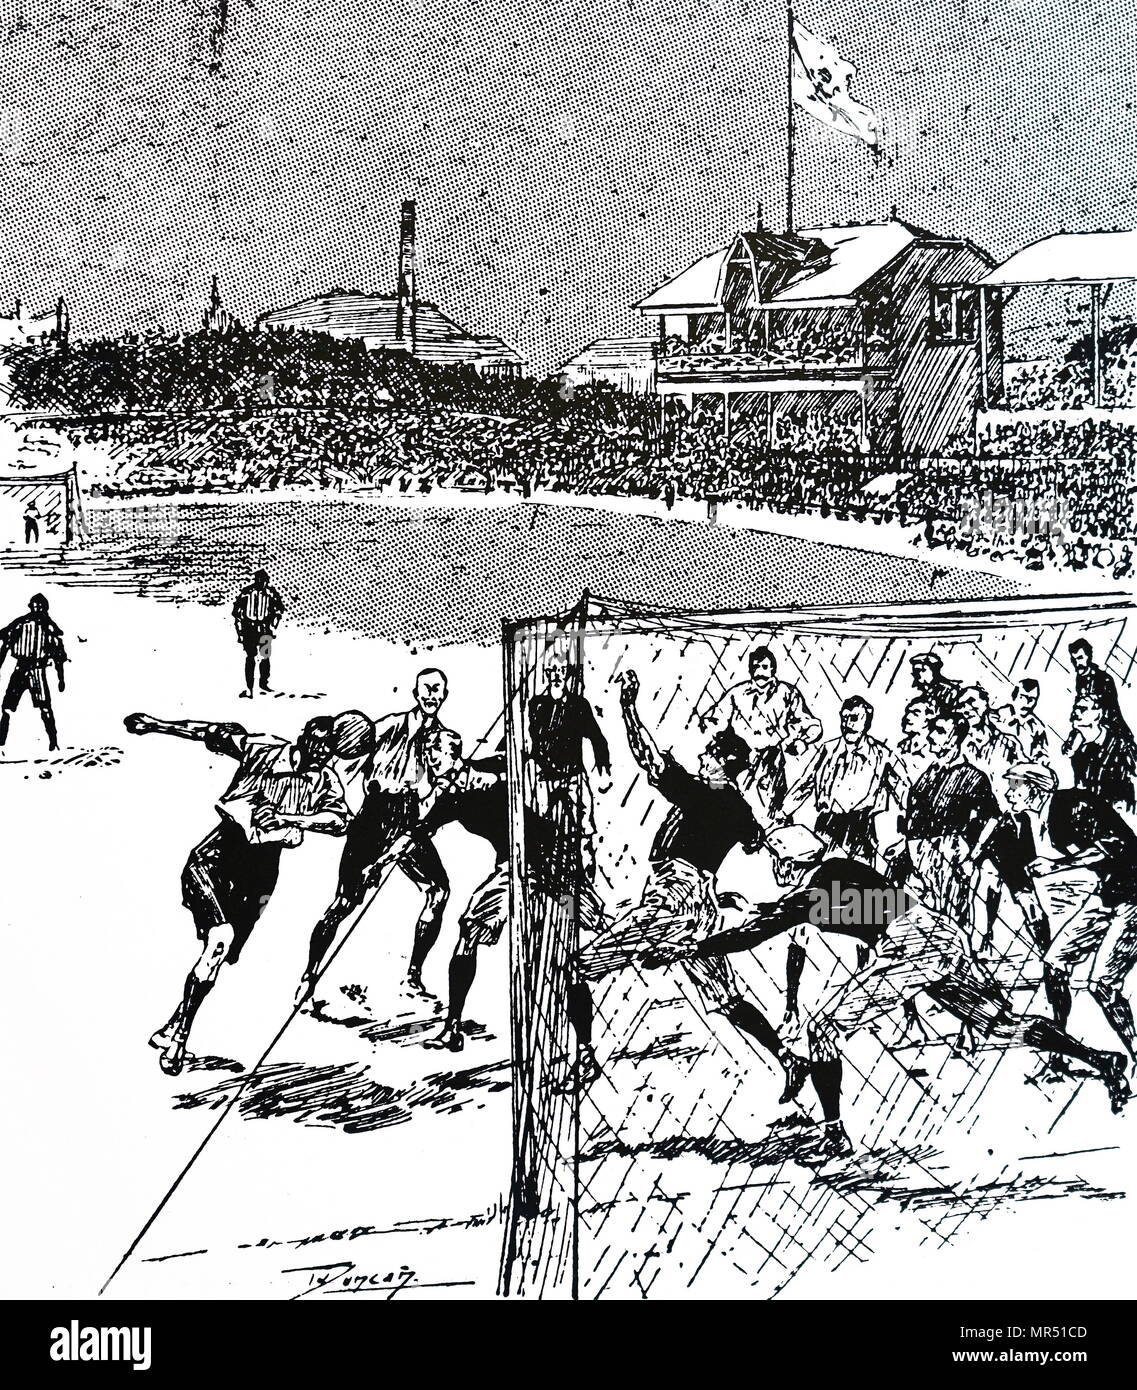 Illustration depicting young men playing football during the final of the 1898 Association Football Cup at Crystal Palace, London. Dated 19th century Stock Photo